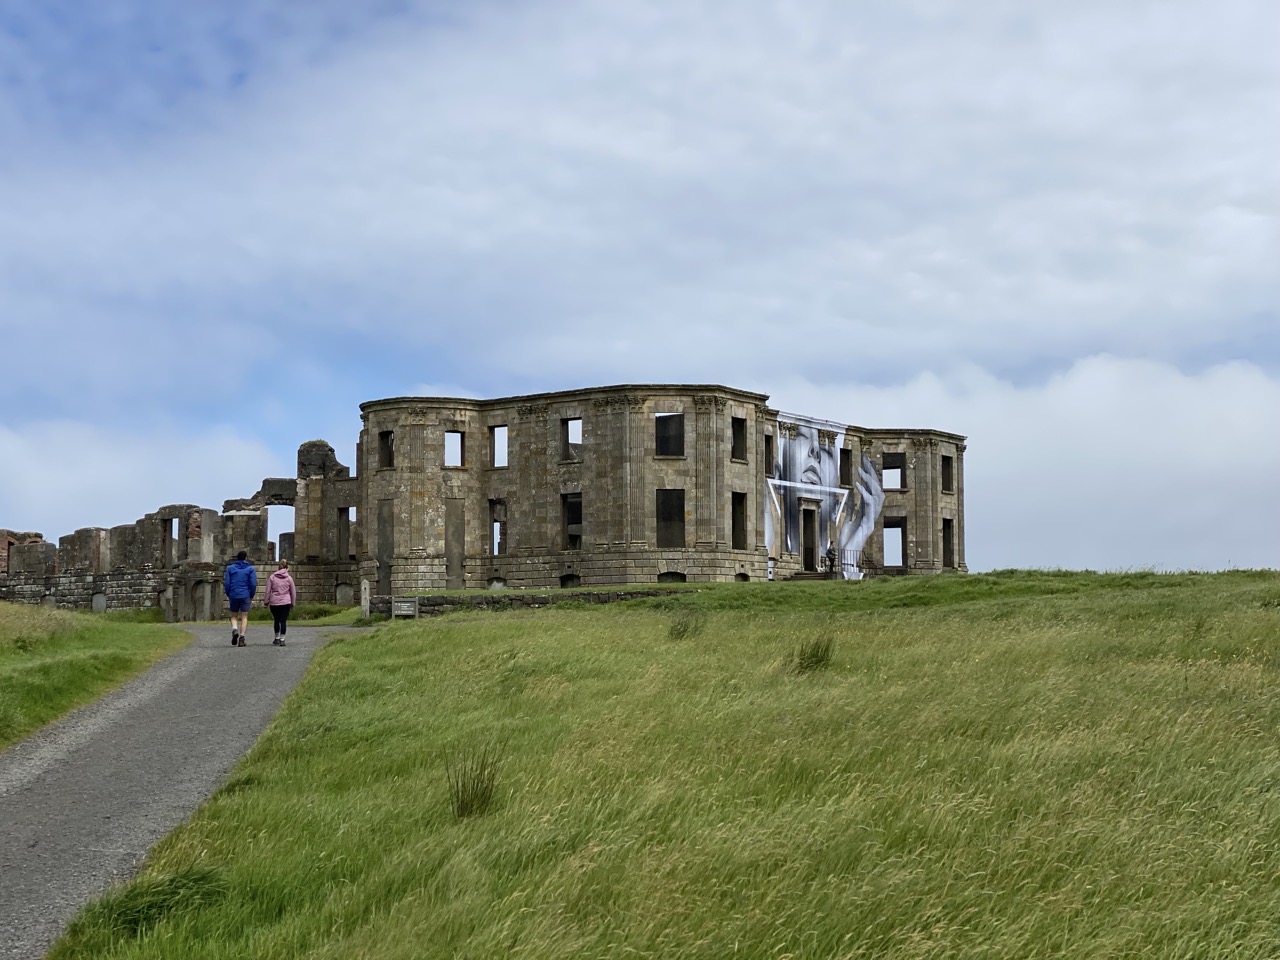 The house ruins at Downhill, with Big Art